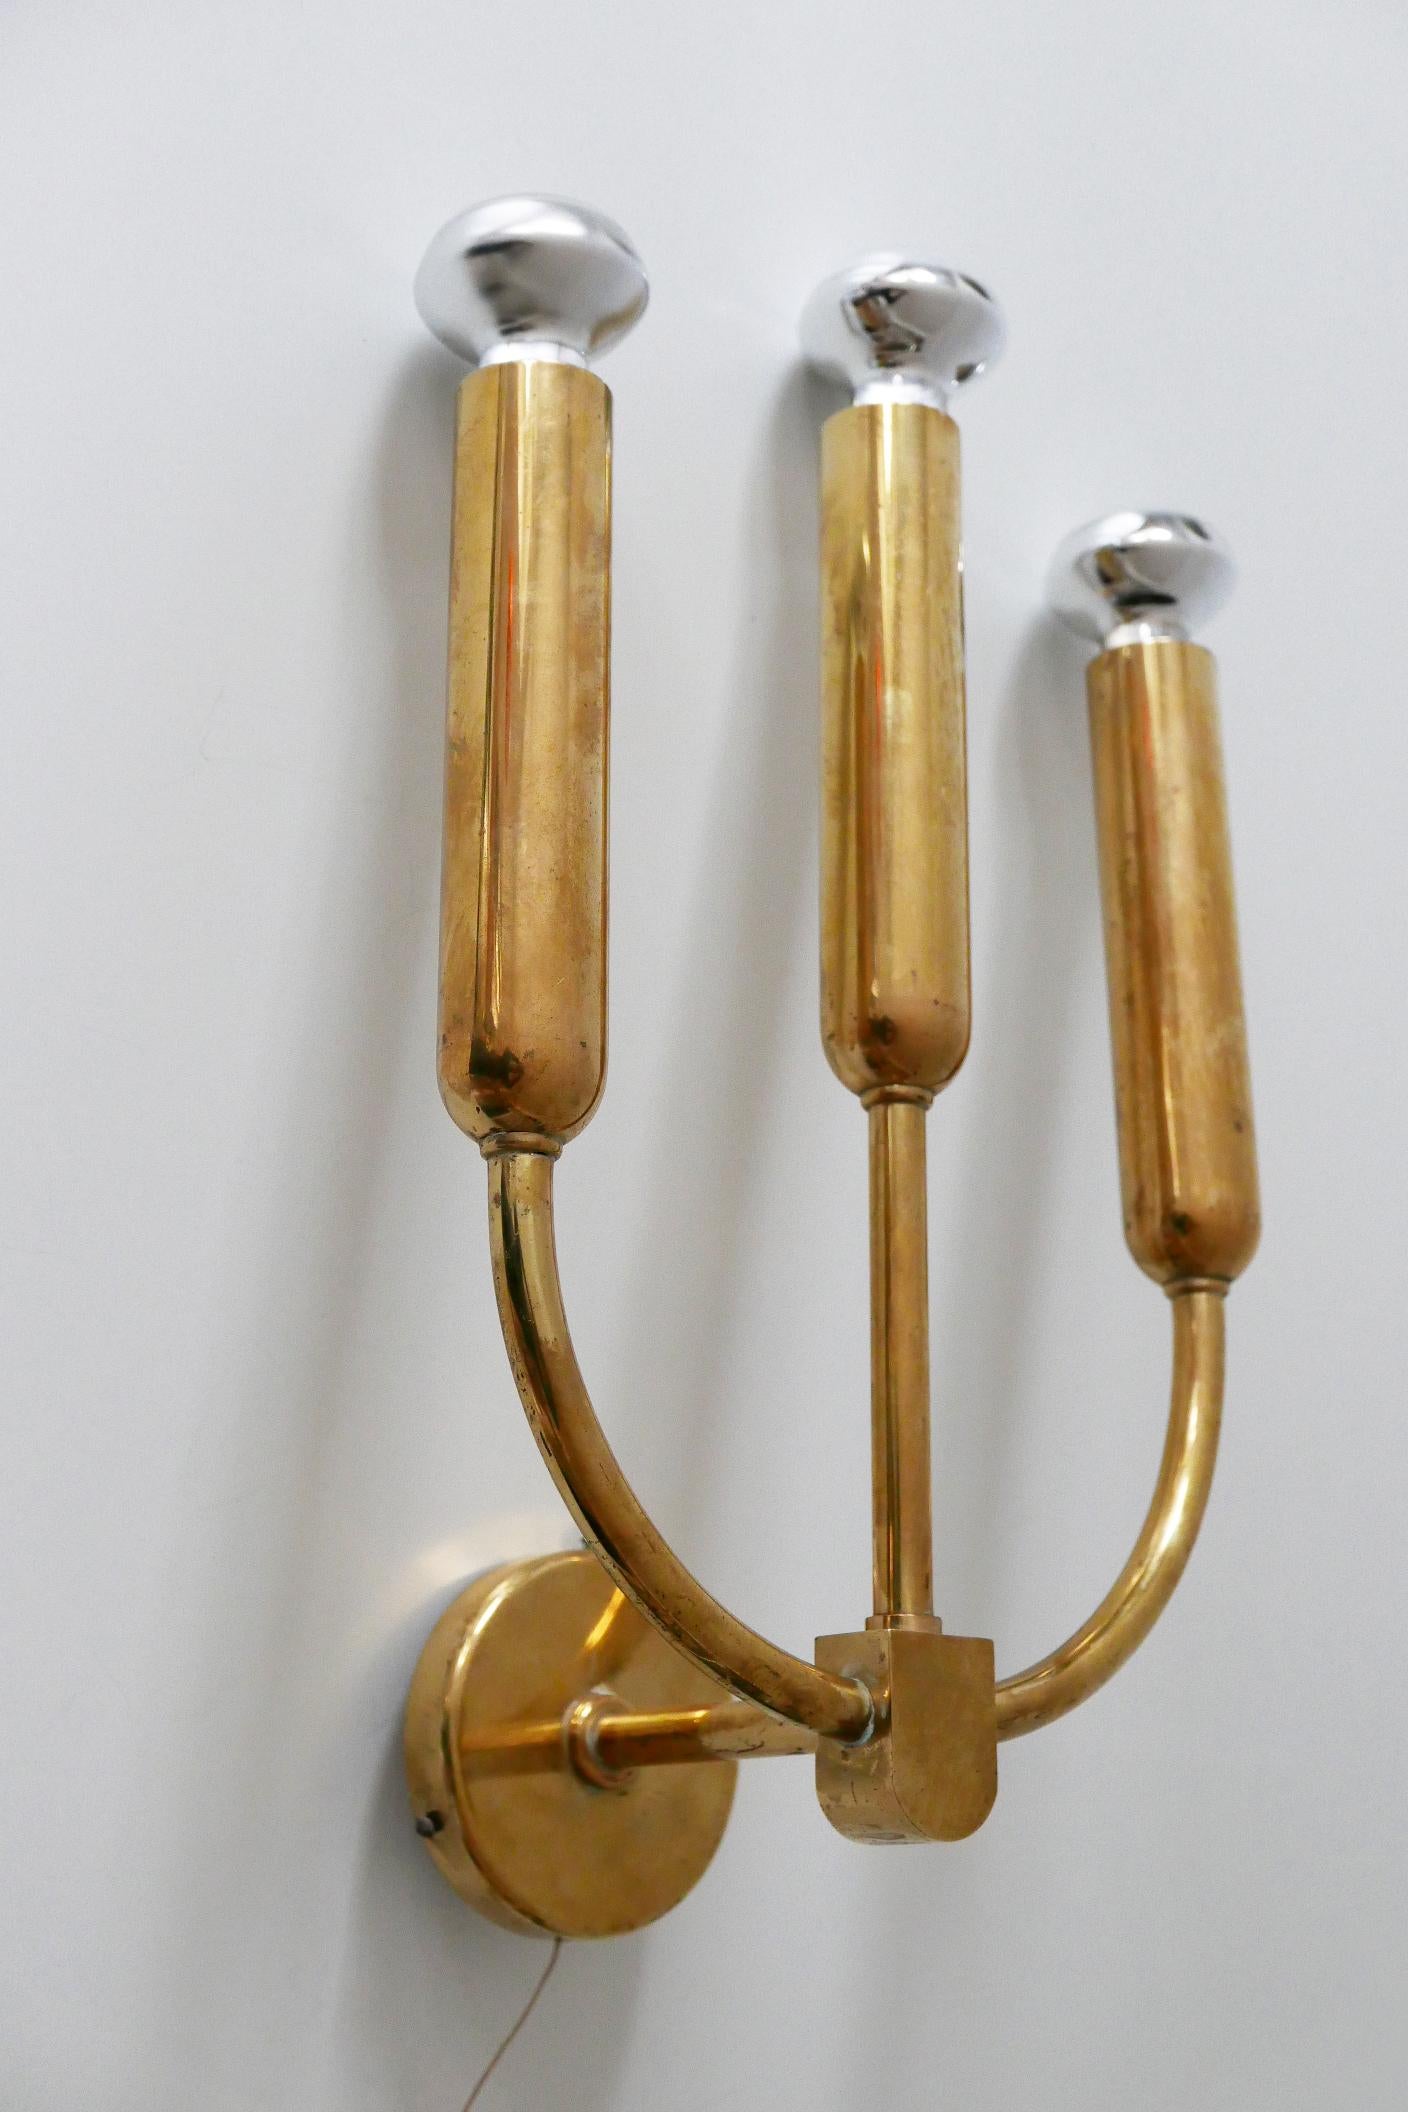 German Extremely Rare Three-Flamed Mid-Century Modern Brass Wall Lamp or Sconce, 1950s